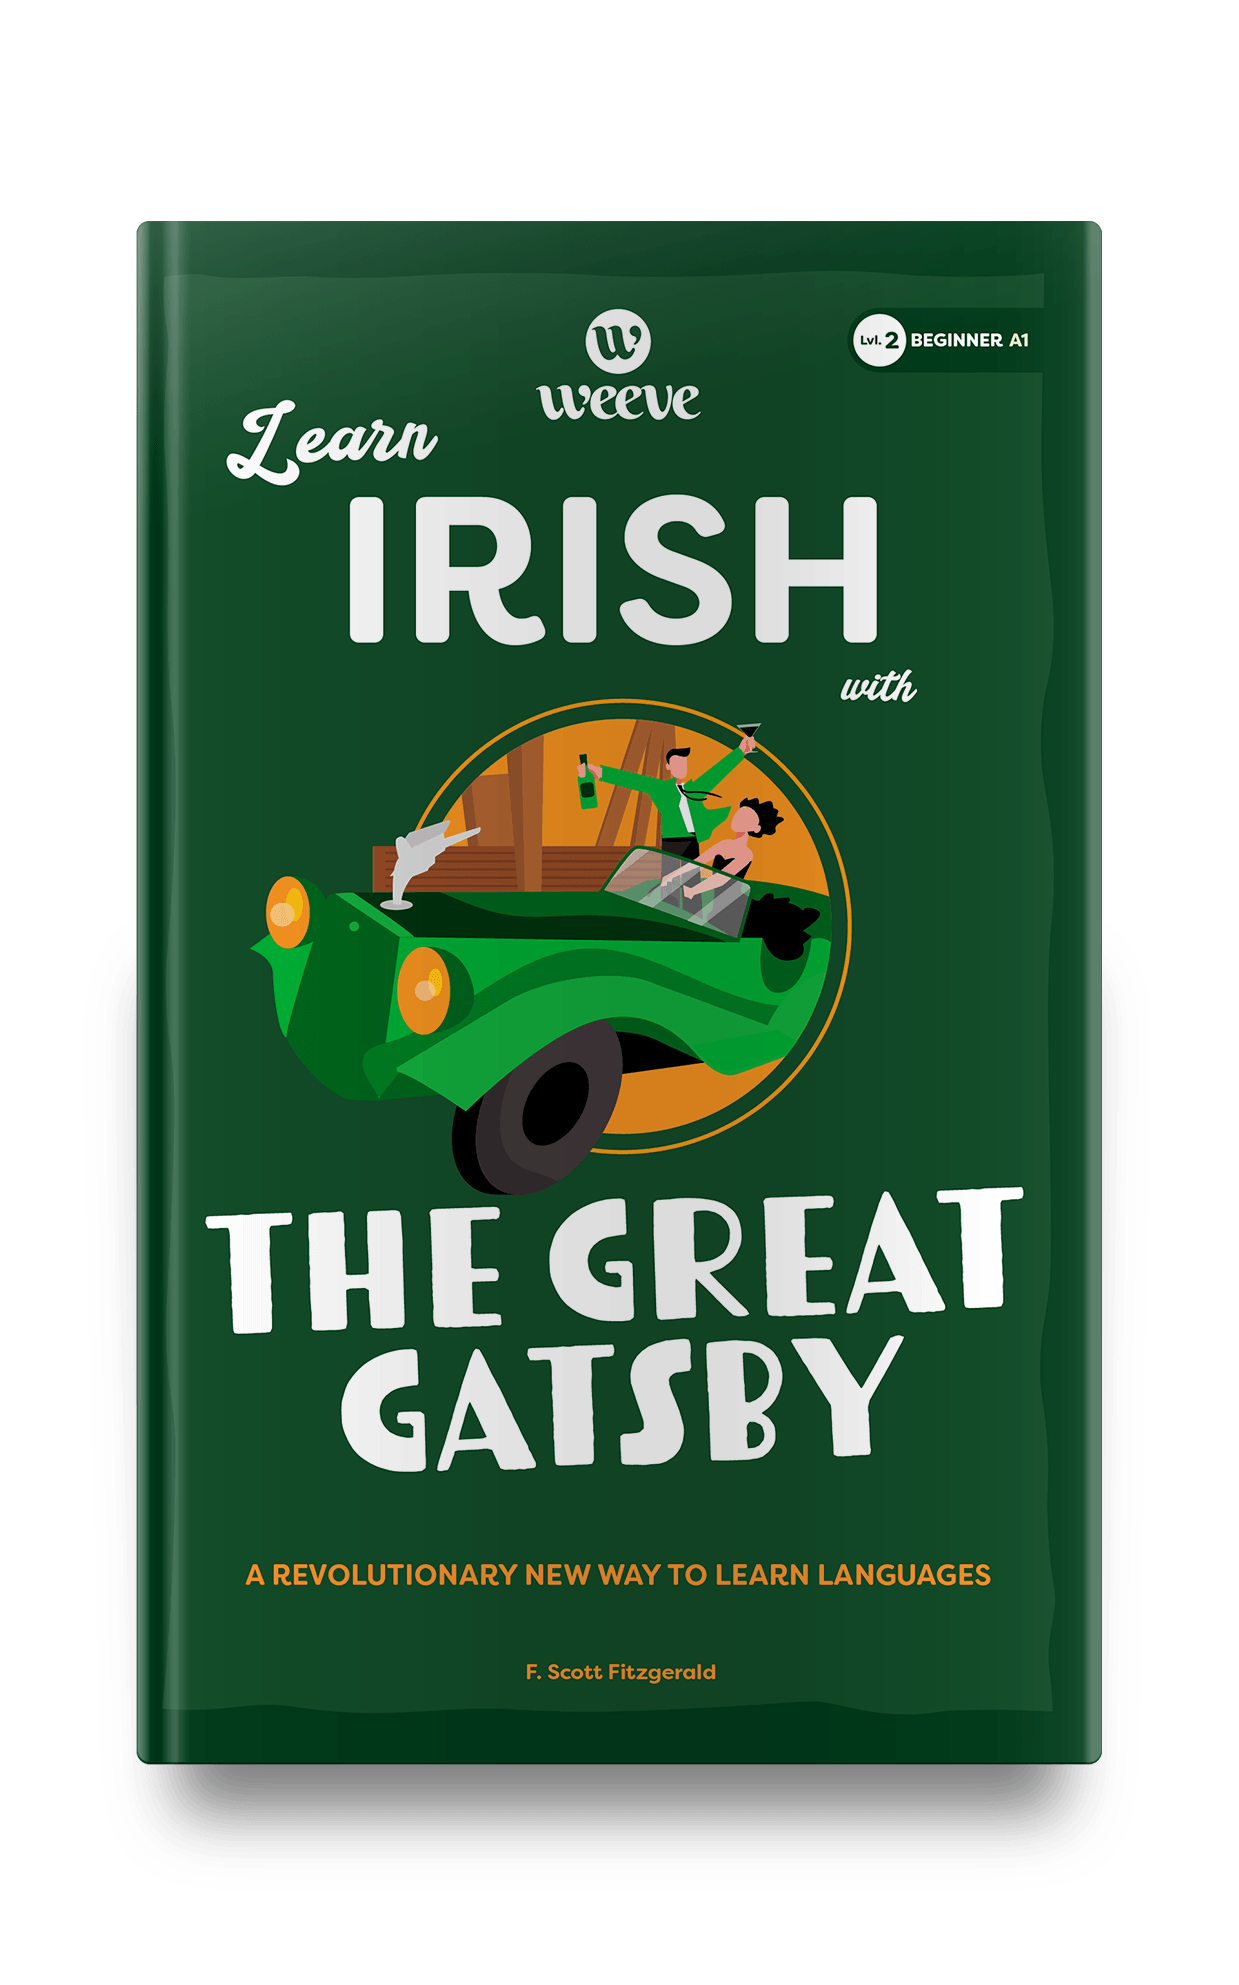 Learn Irish with The Great Gatsby - Weeve